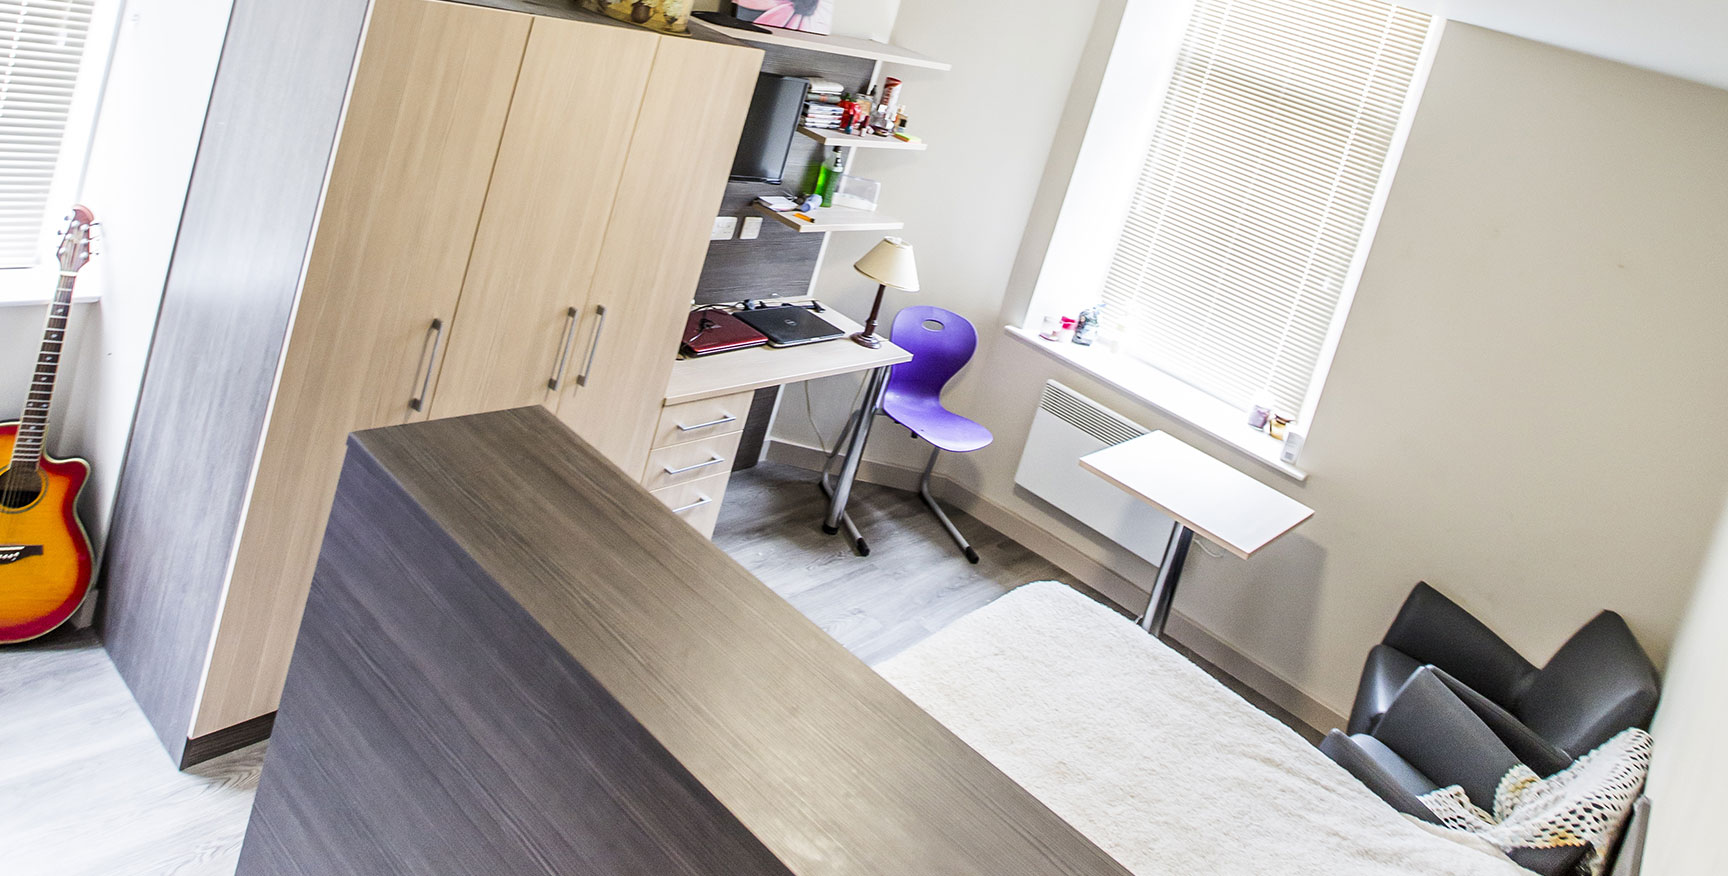 Clyde House - Luxury Student Accommodation Glasgow (studio view)